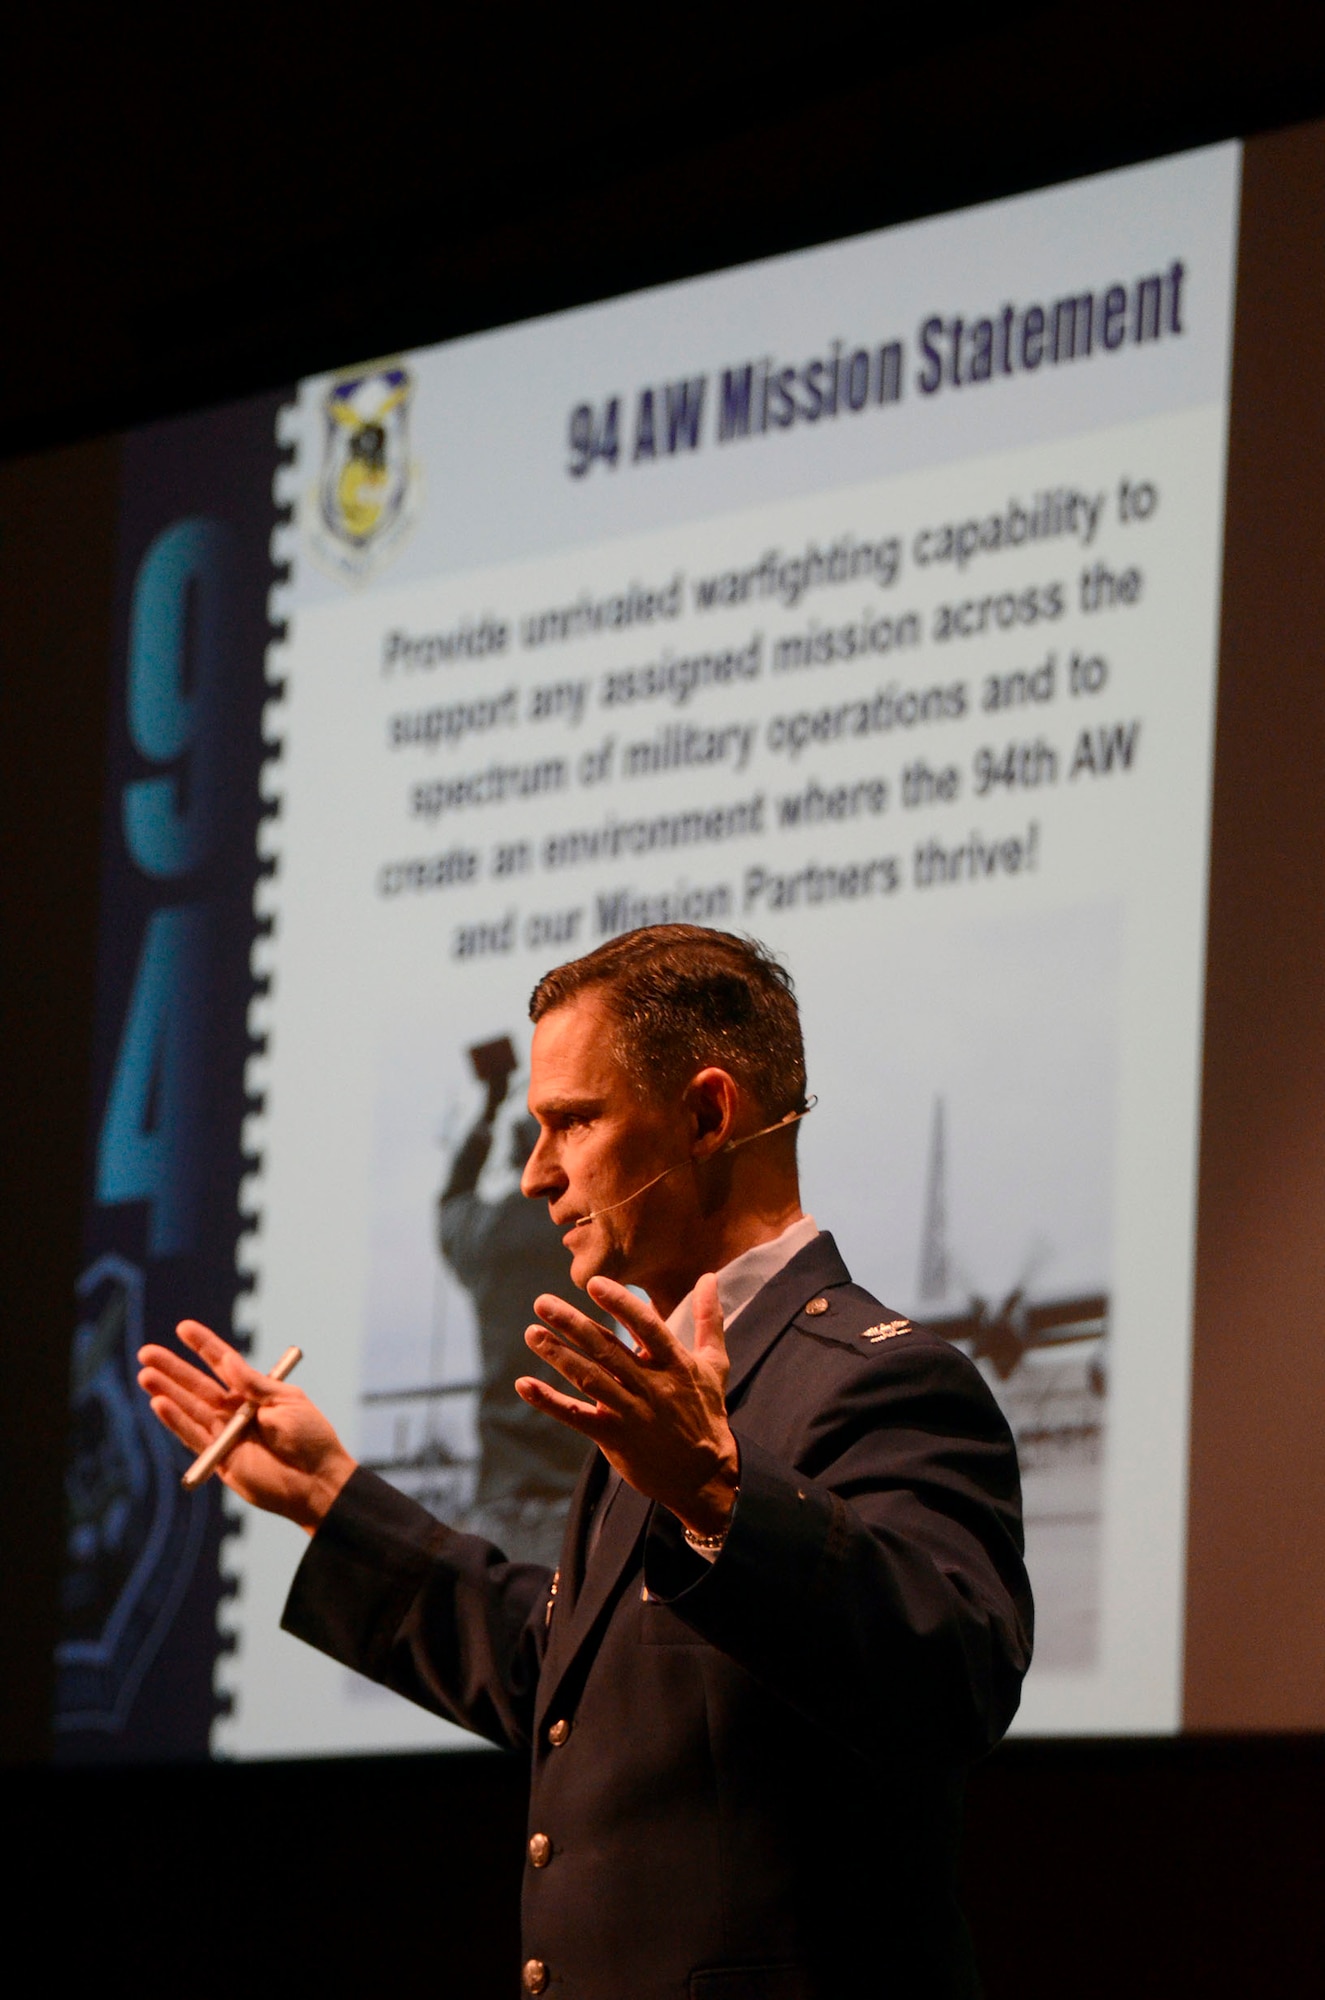 Col. Brett Clark, 94th Airlift Wing commander, speaks to a crowd of business professionals about Dobbins Air Reserve Base mission at the Acworth Business Associations monthly meeting held in Acworth, Ga. Nov. 6, 2014. (U.S. Air Force photo by Don Peek/Released)